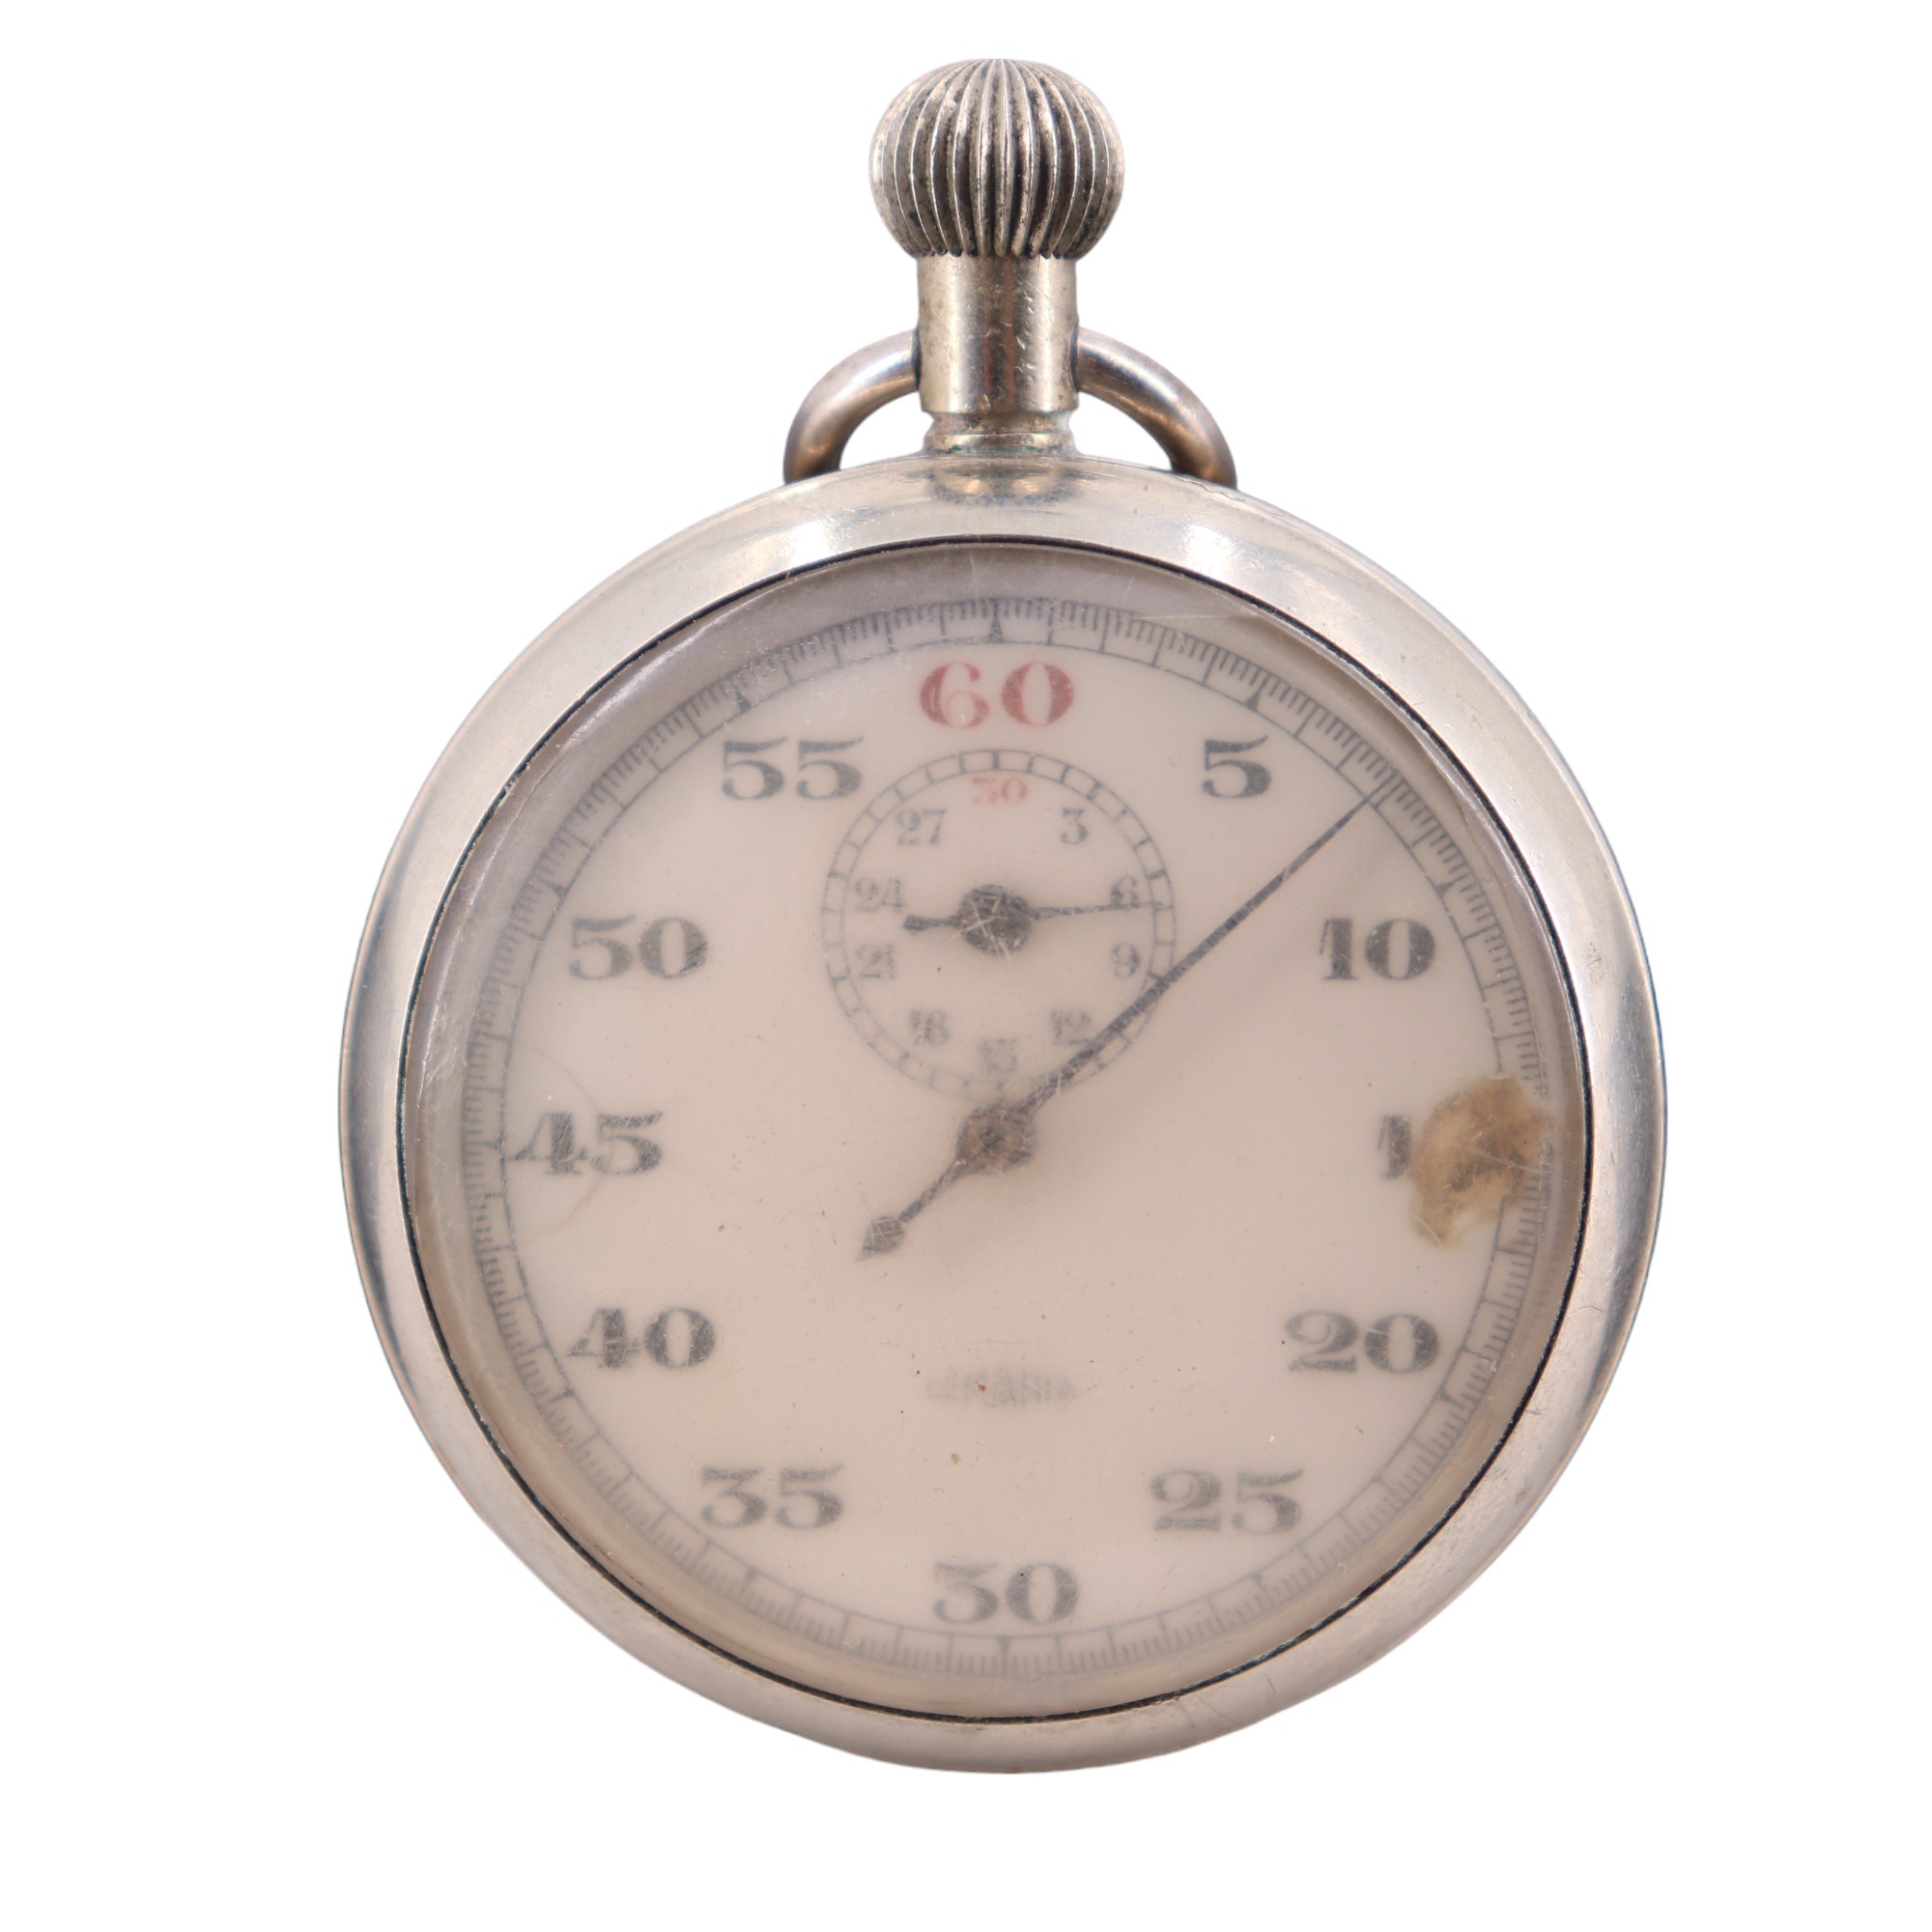 A 1942 RAF Navigator's stopwatch by Lemania, Air Ministry Stores Reference 6B/117